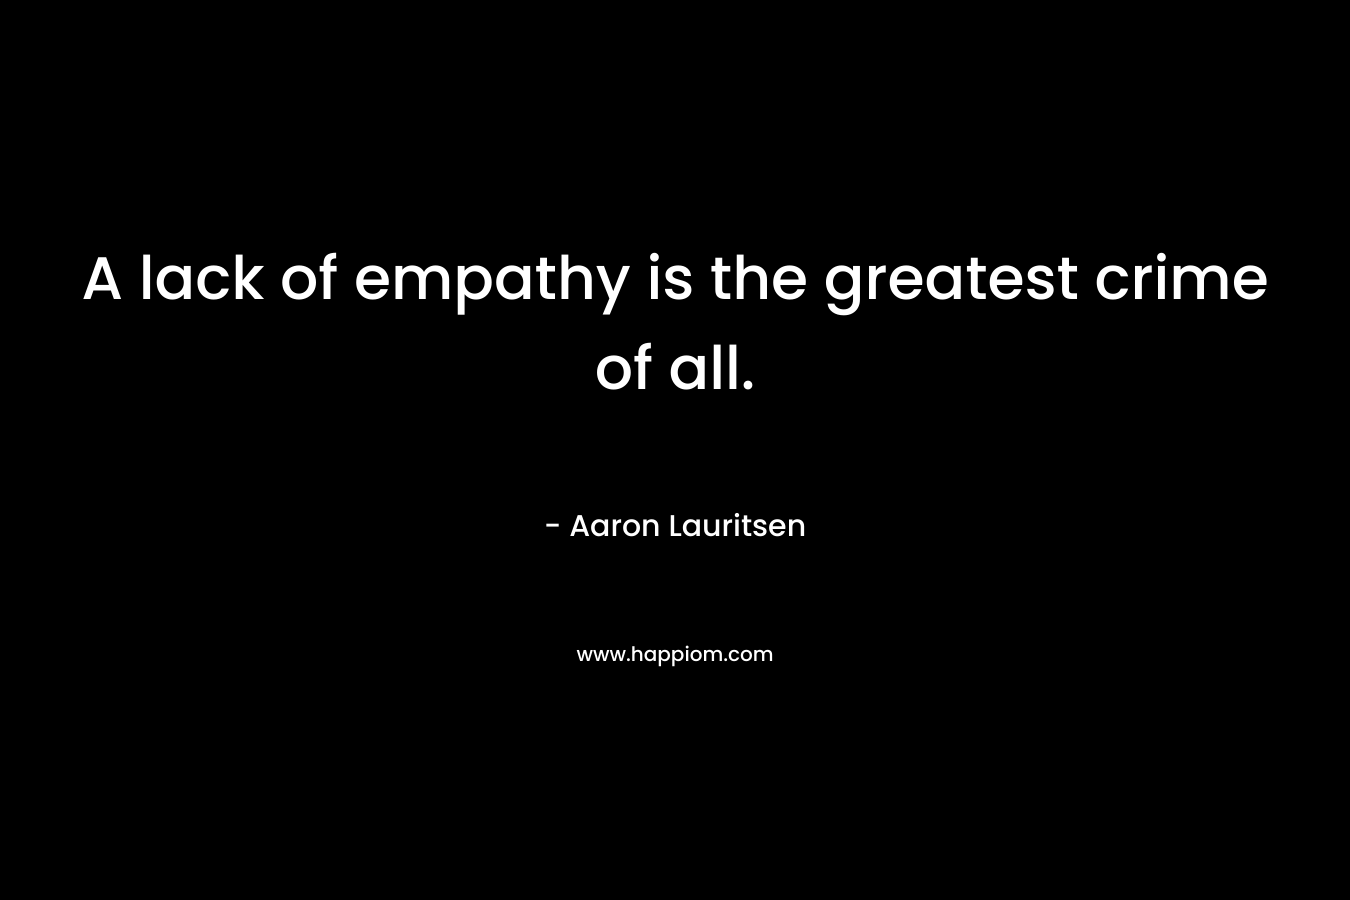 A lack of empathy is the greatest crime of all.